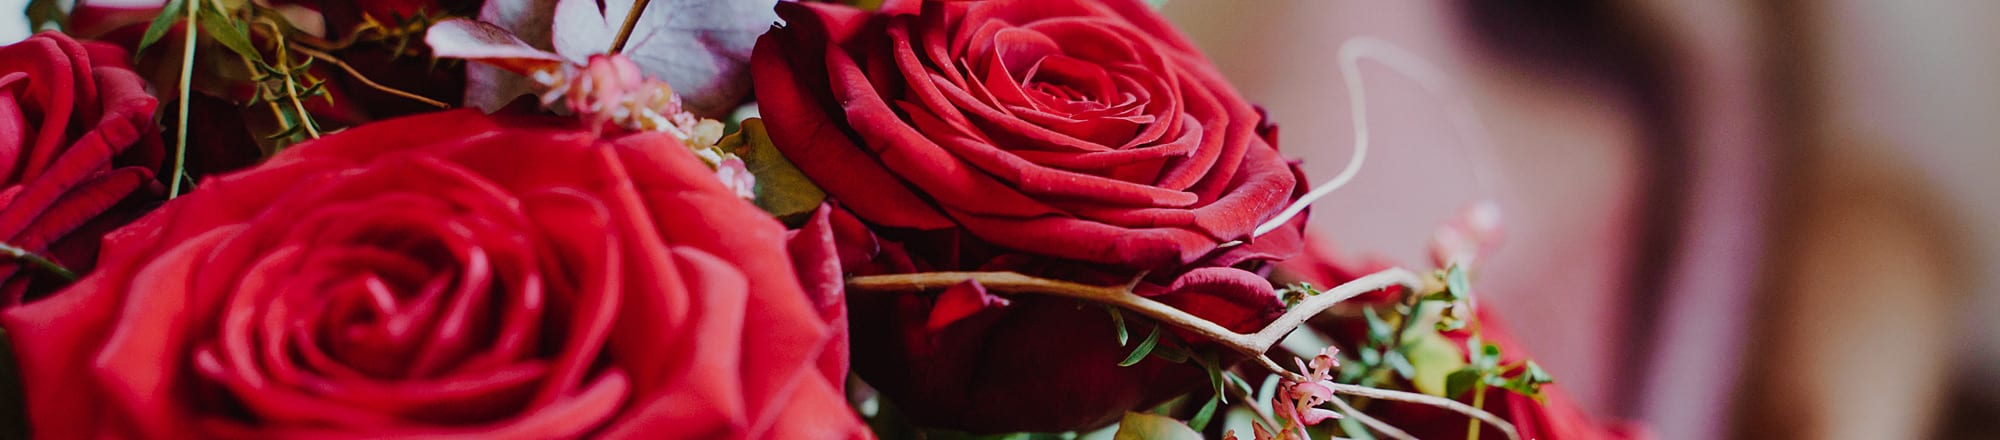 12 June: World Red Rose Day